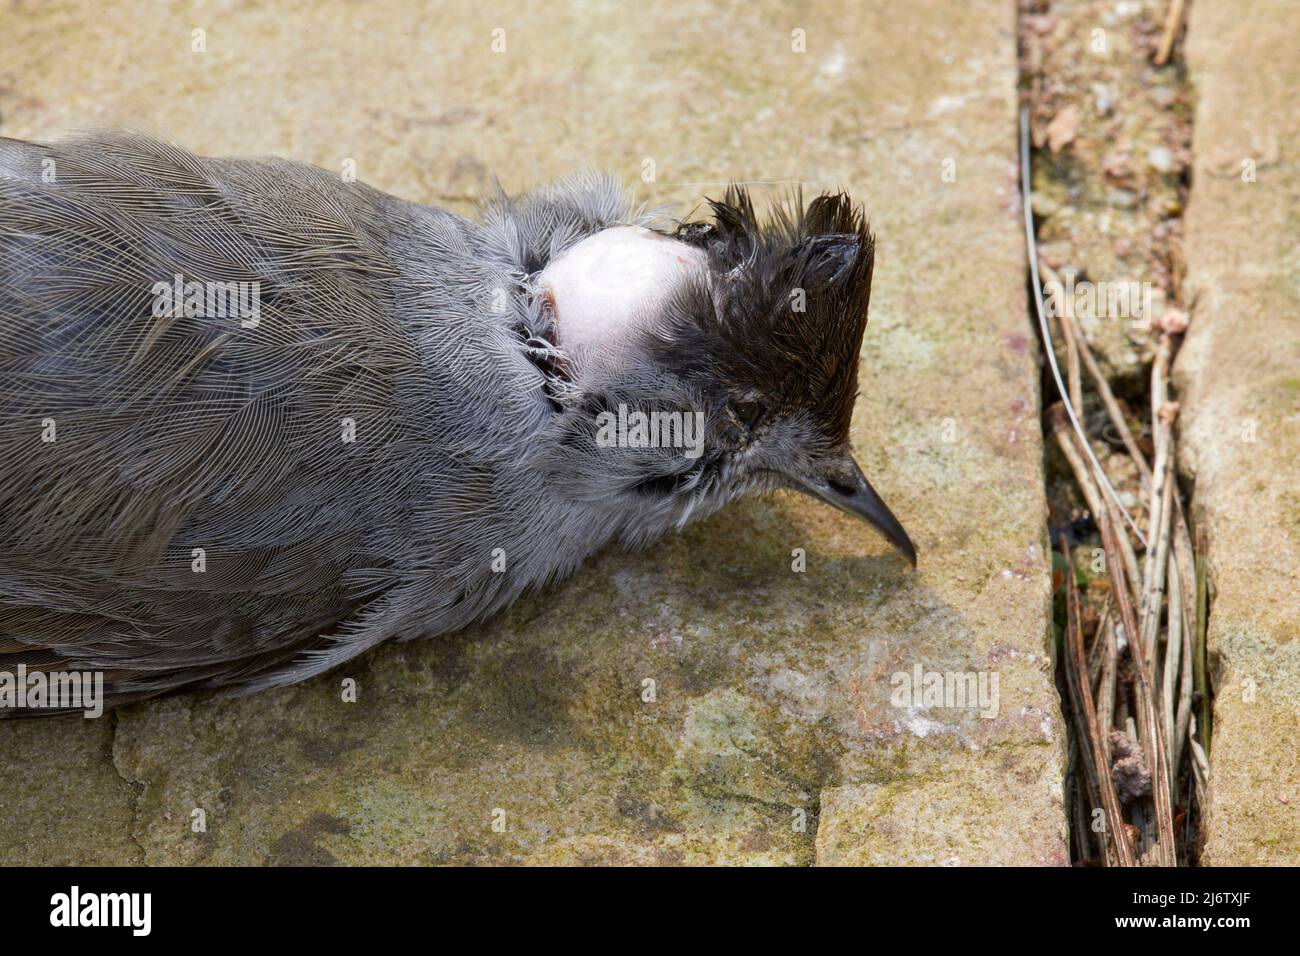 Dead Black Cap bird outside a conservatory having flown into a large, glass window Stock Photo